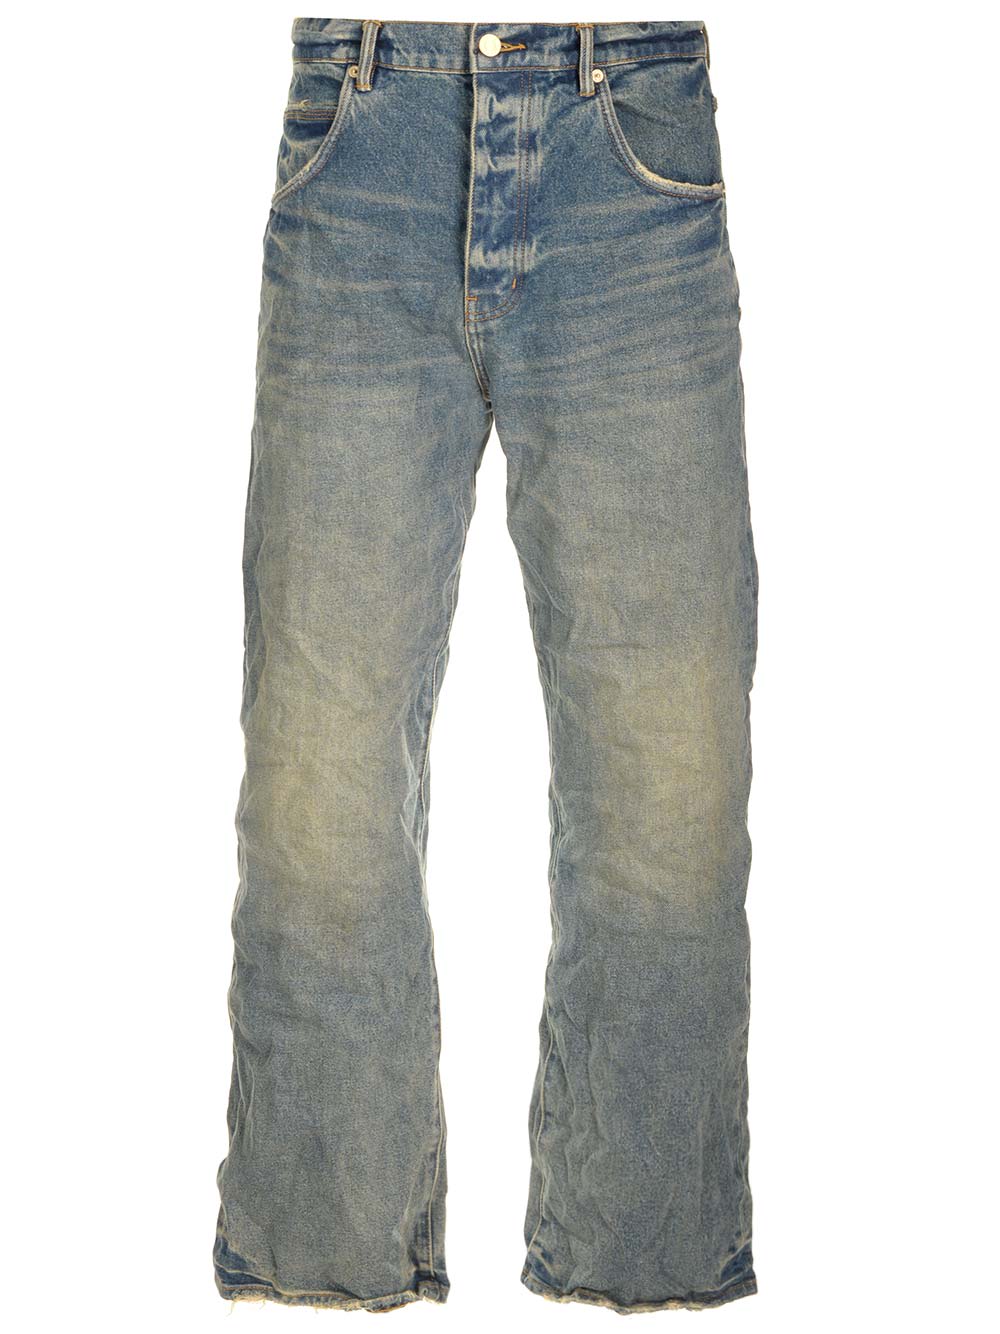 Distressed Style Jeans